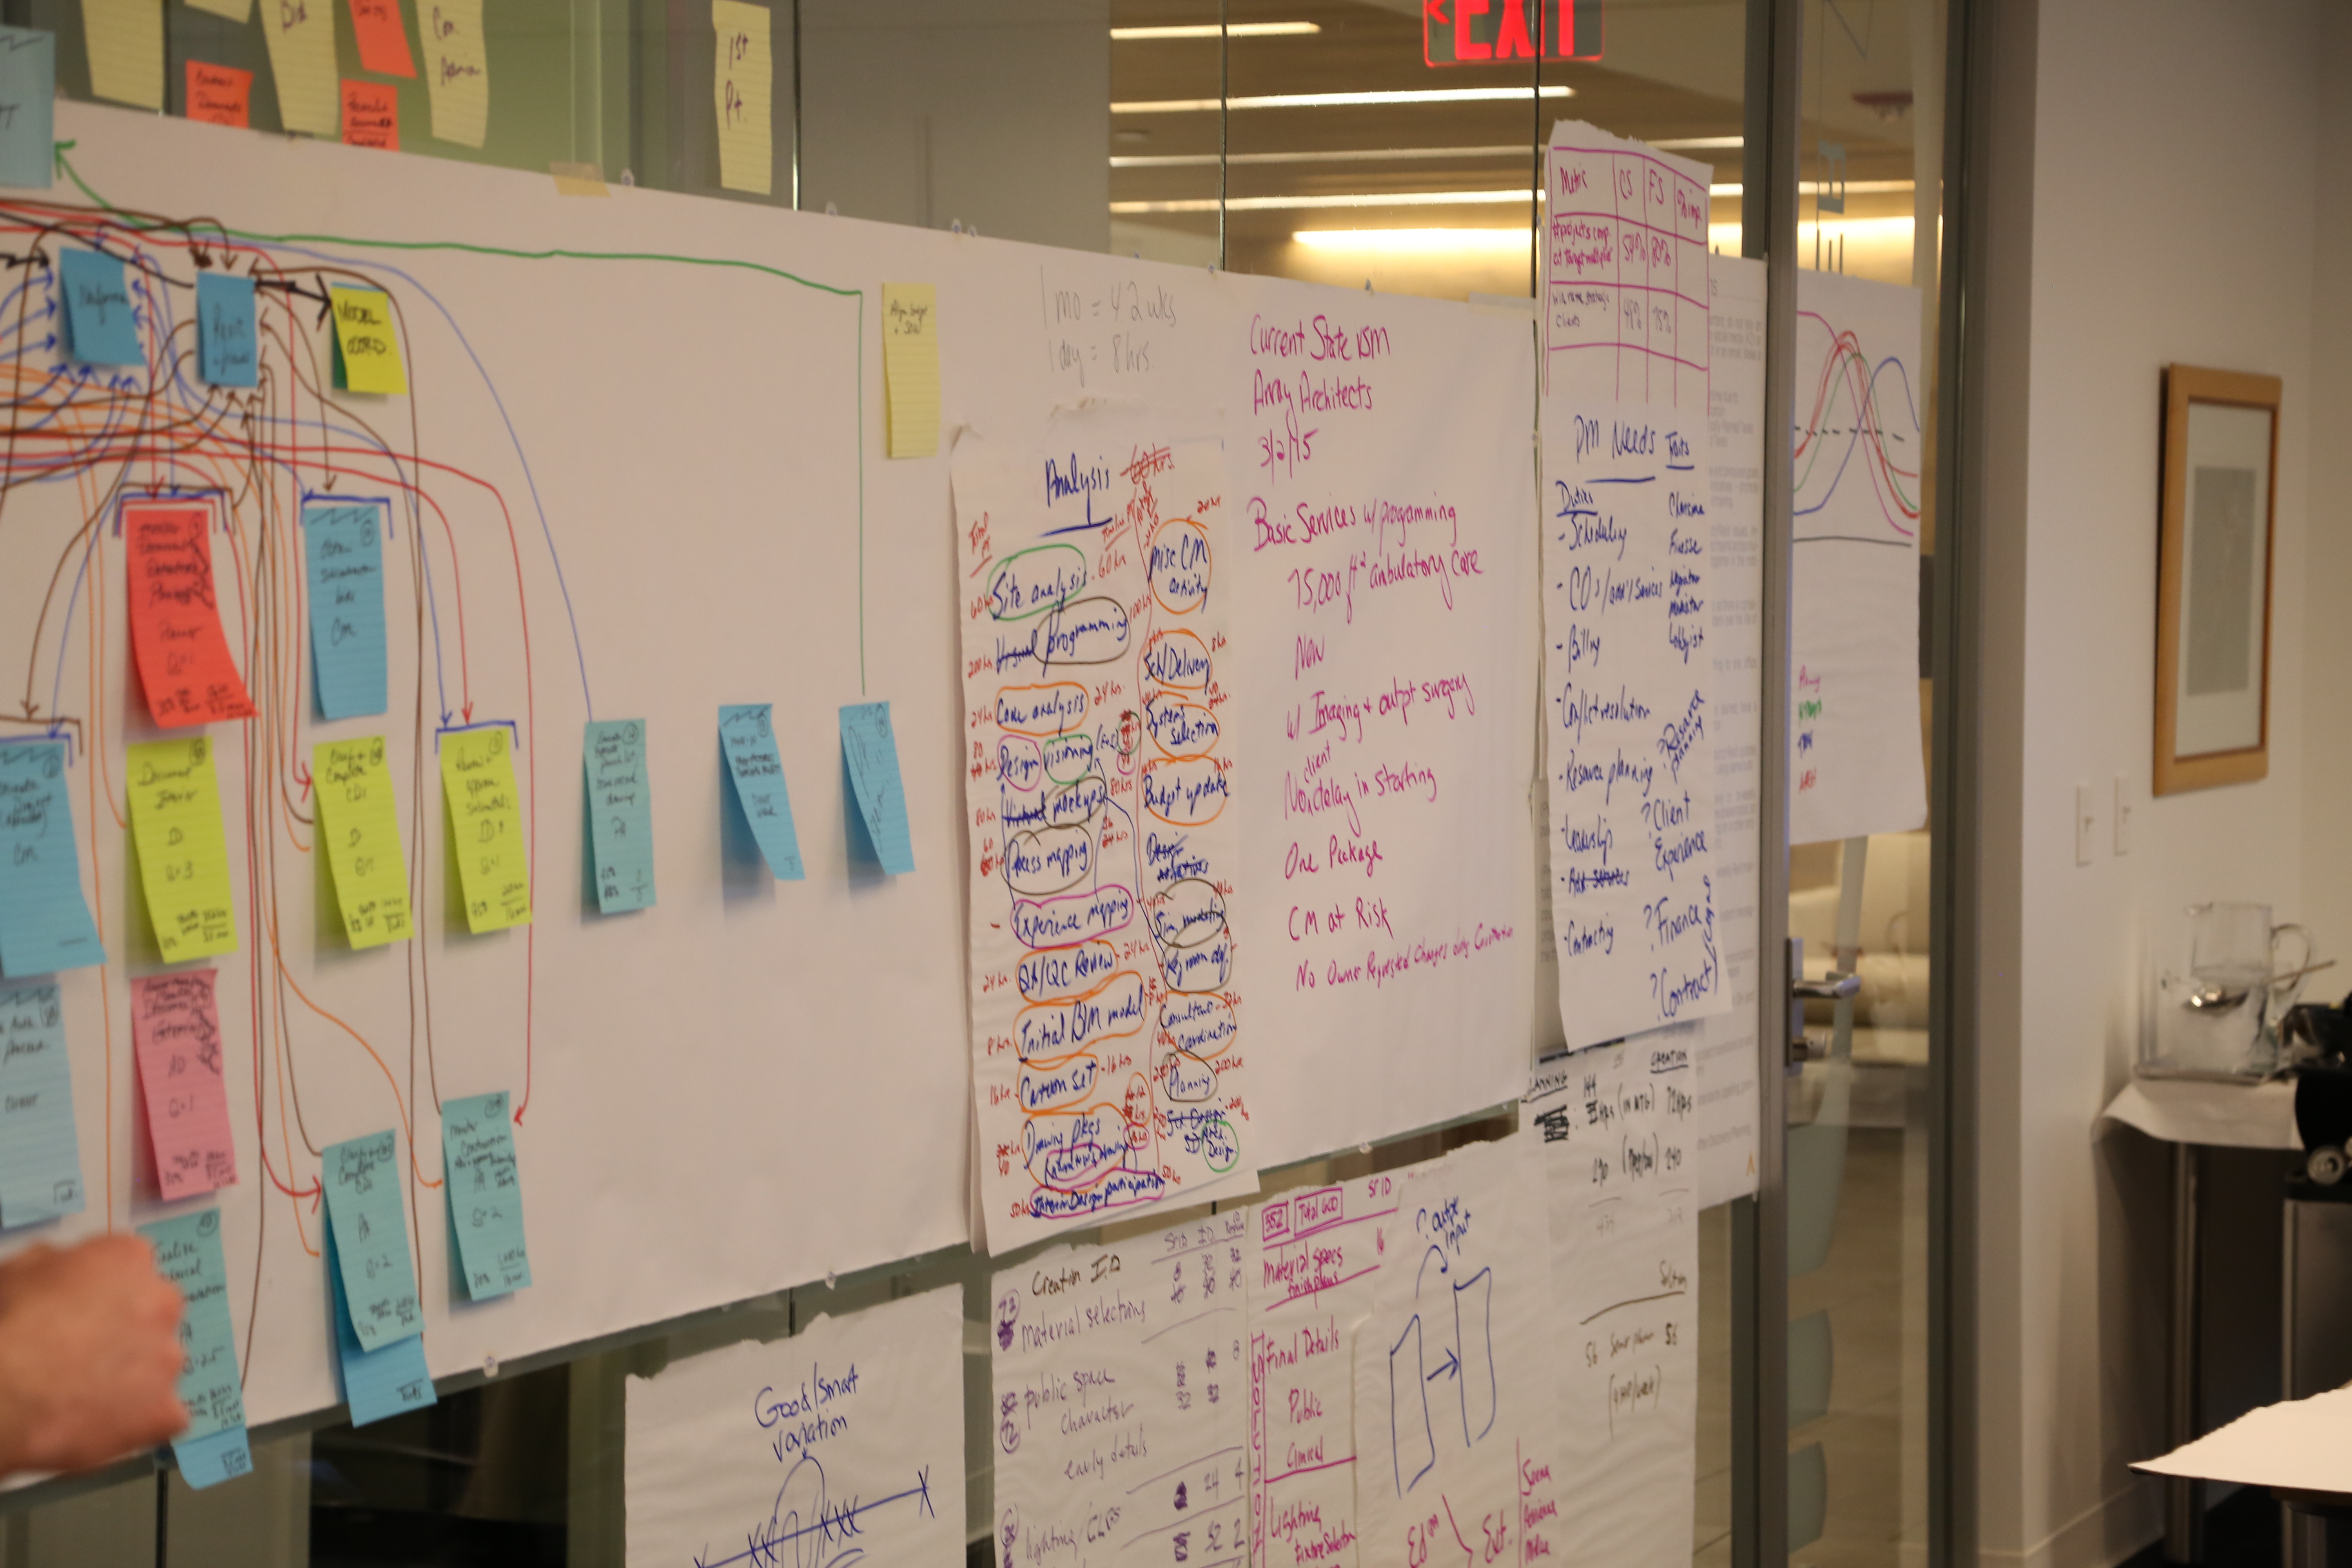 Value Stream Mapping Exercise